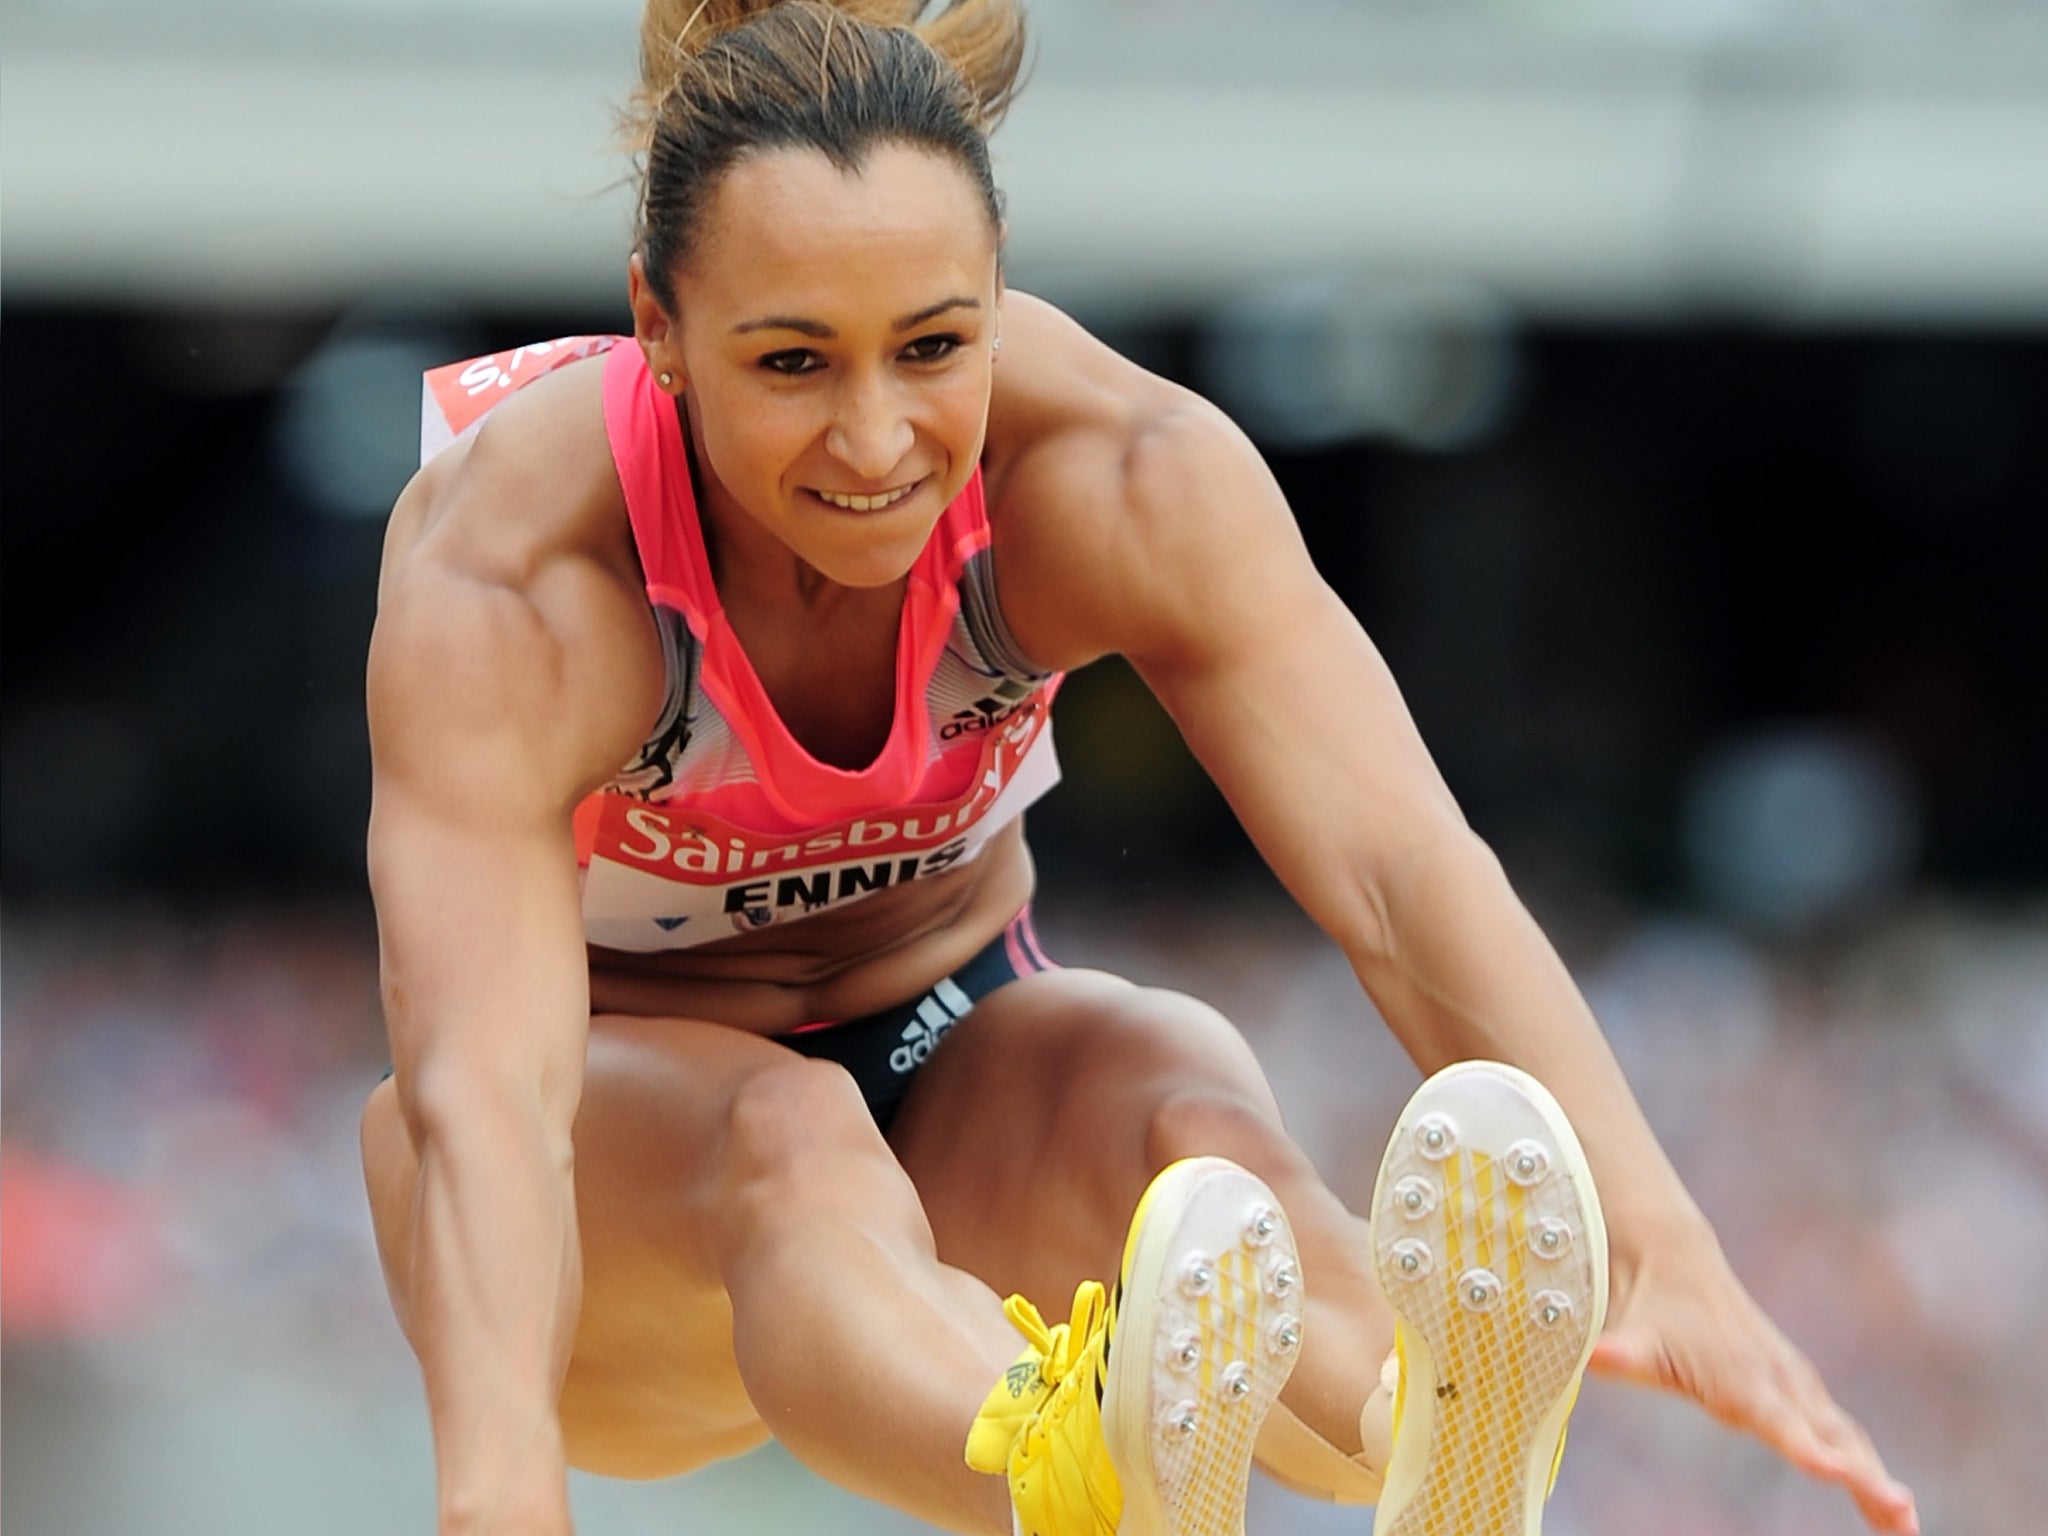 Ennis-Hill competing in the long jump at last weekend's Anniversary Games